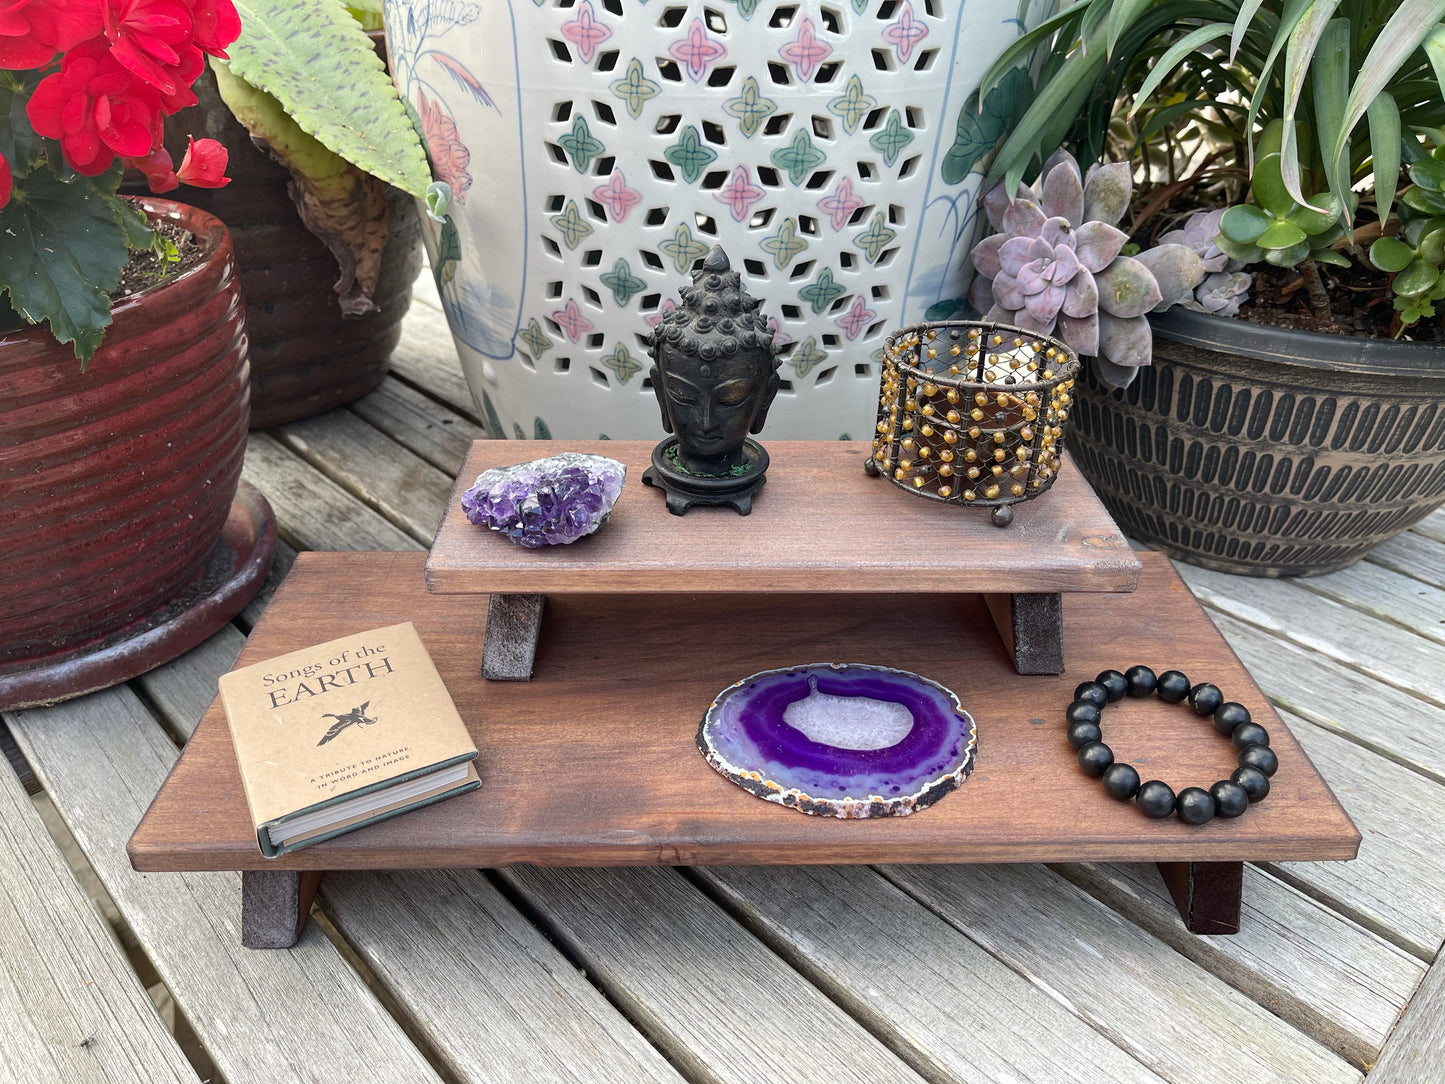 Beautiful Burnt Copper Wood Wash Meditation Tables, Zen, Prayer Tables, Studio Accents, Yoga, Altar Tables, Home Accent, Crystal Display